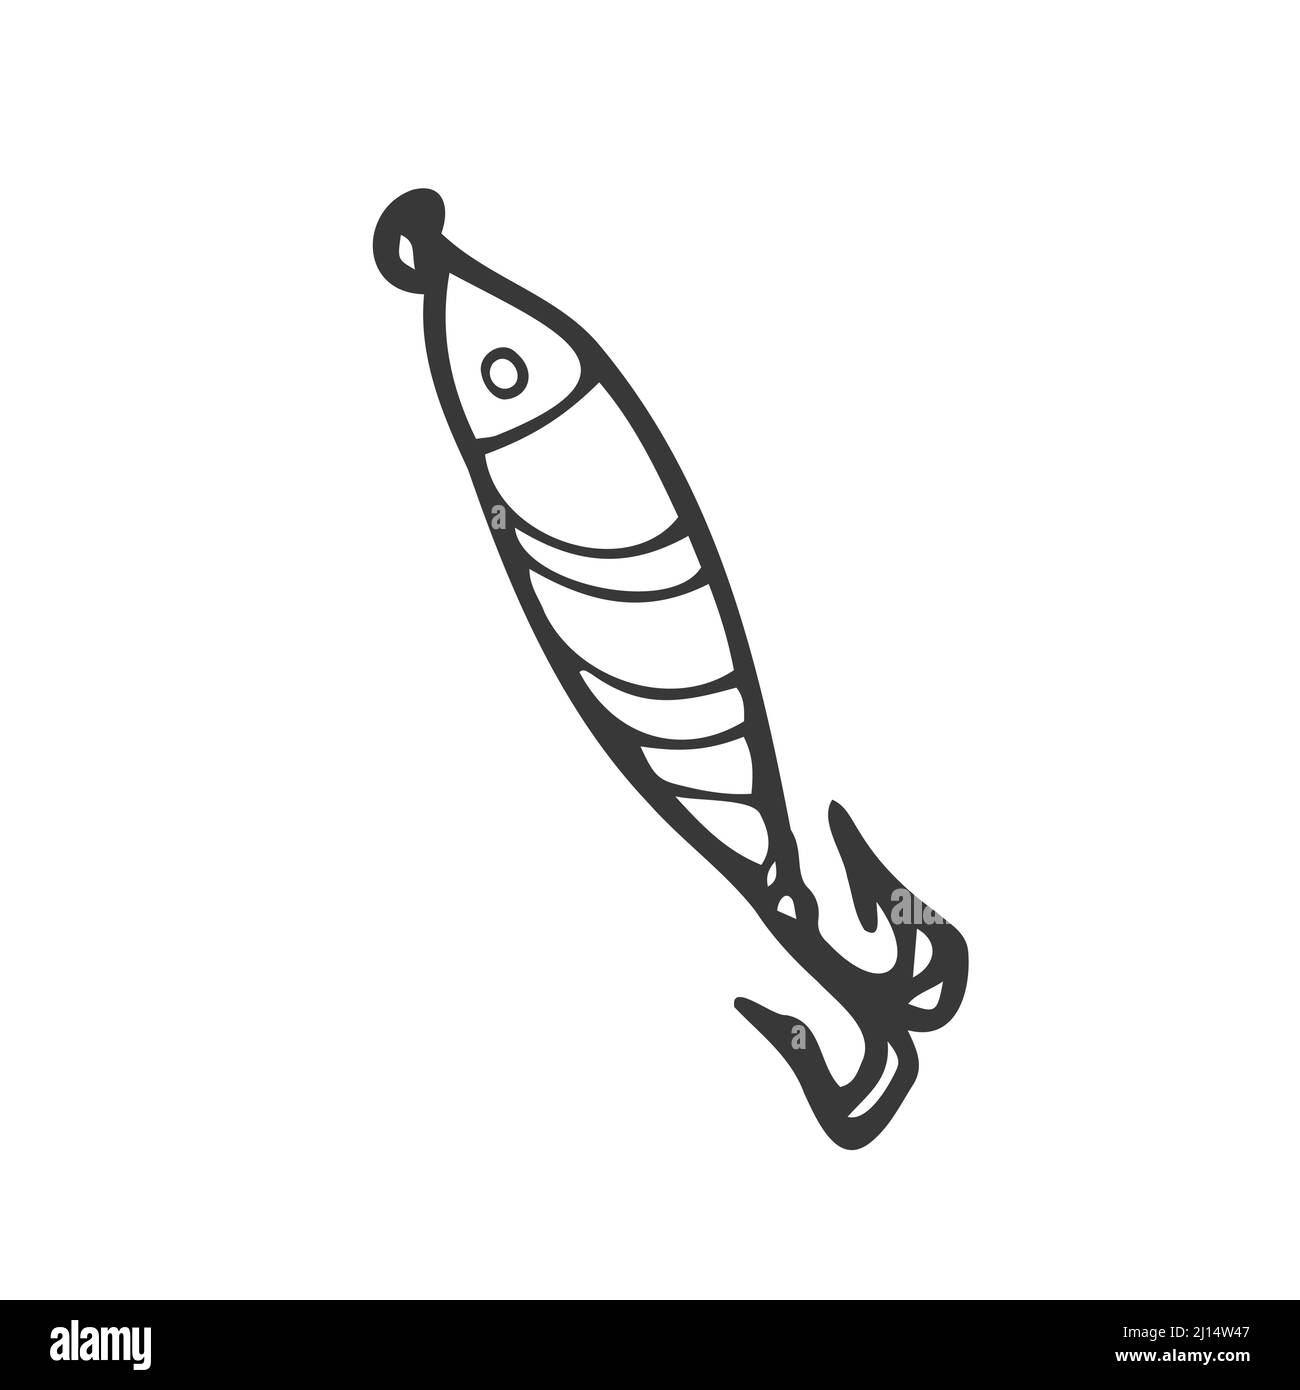 Fishing lure Black and White Stock Photos & Images - Page 2 - Alamy